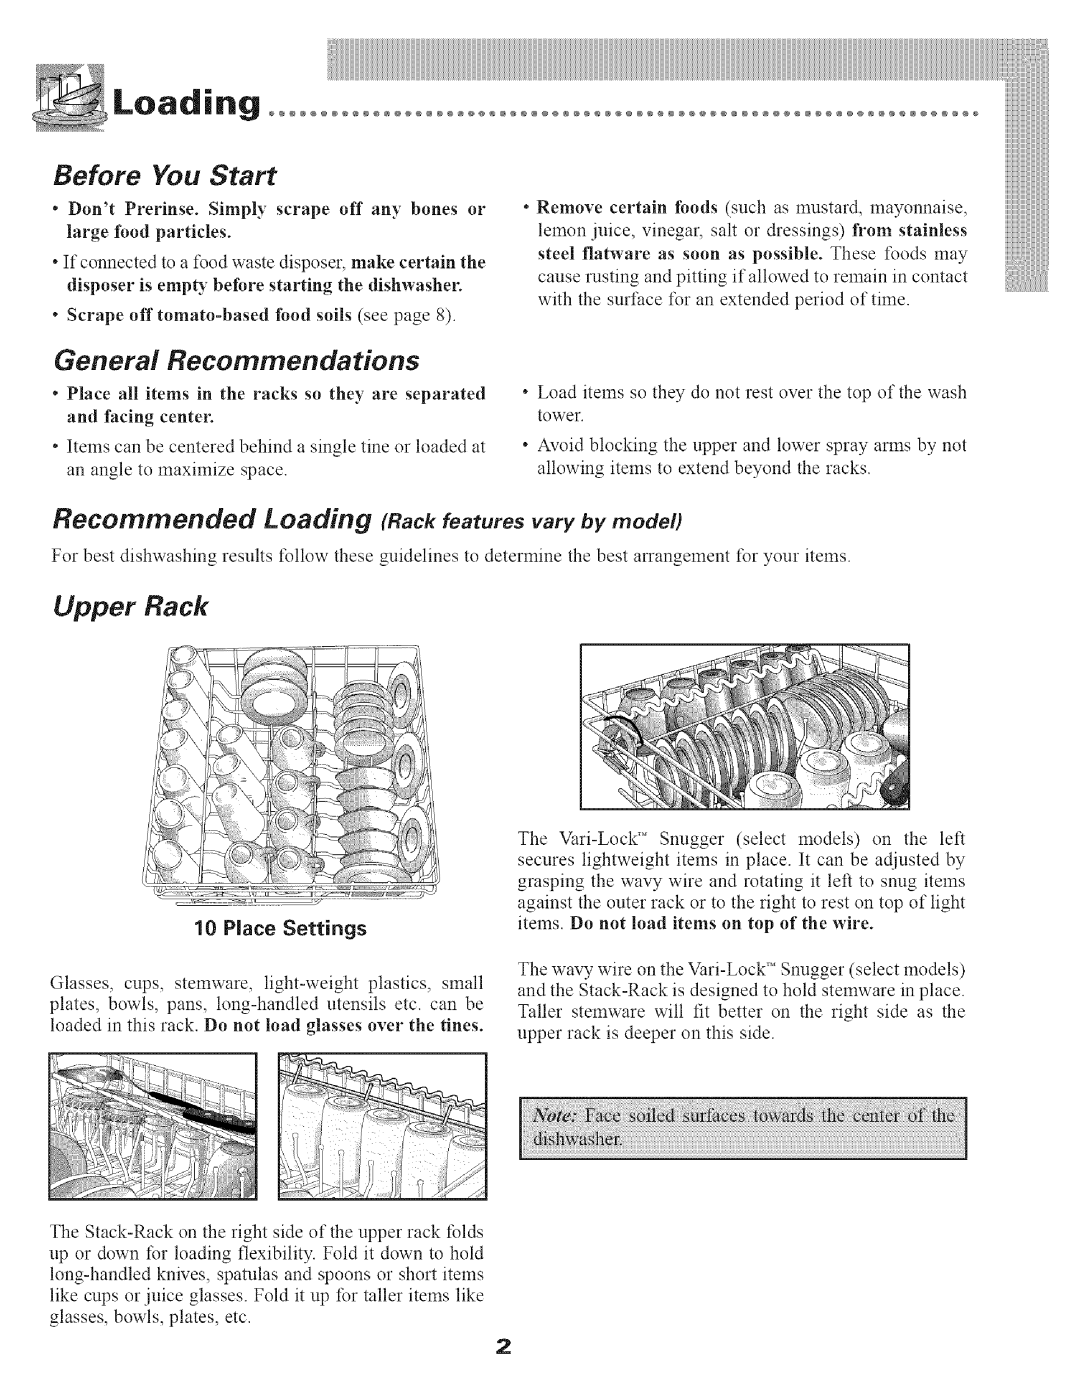 Maytag MDB9100 General Recommendations, Before You Start, Upper Rack, Recommended Loading Rack features vary by model 